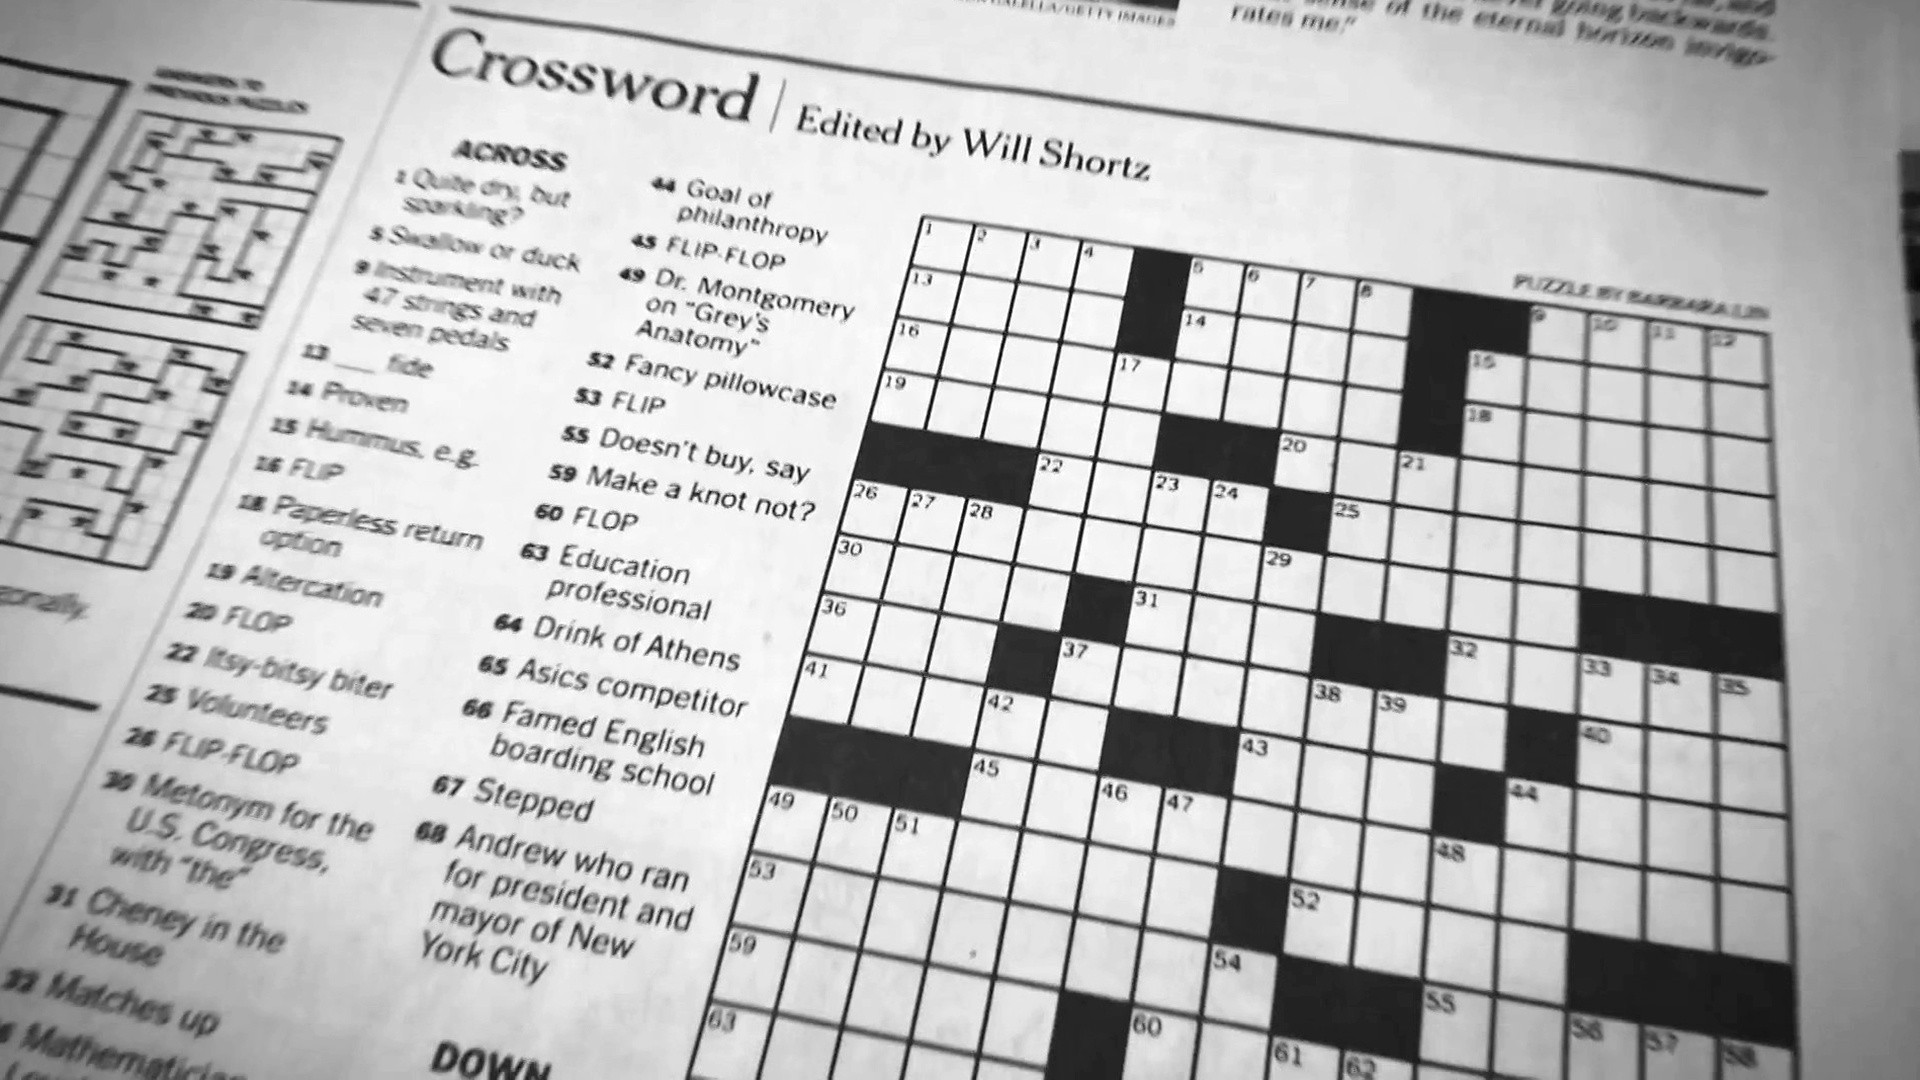 Image of a crossword puzzle in a newspaper